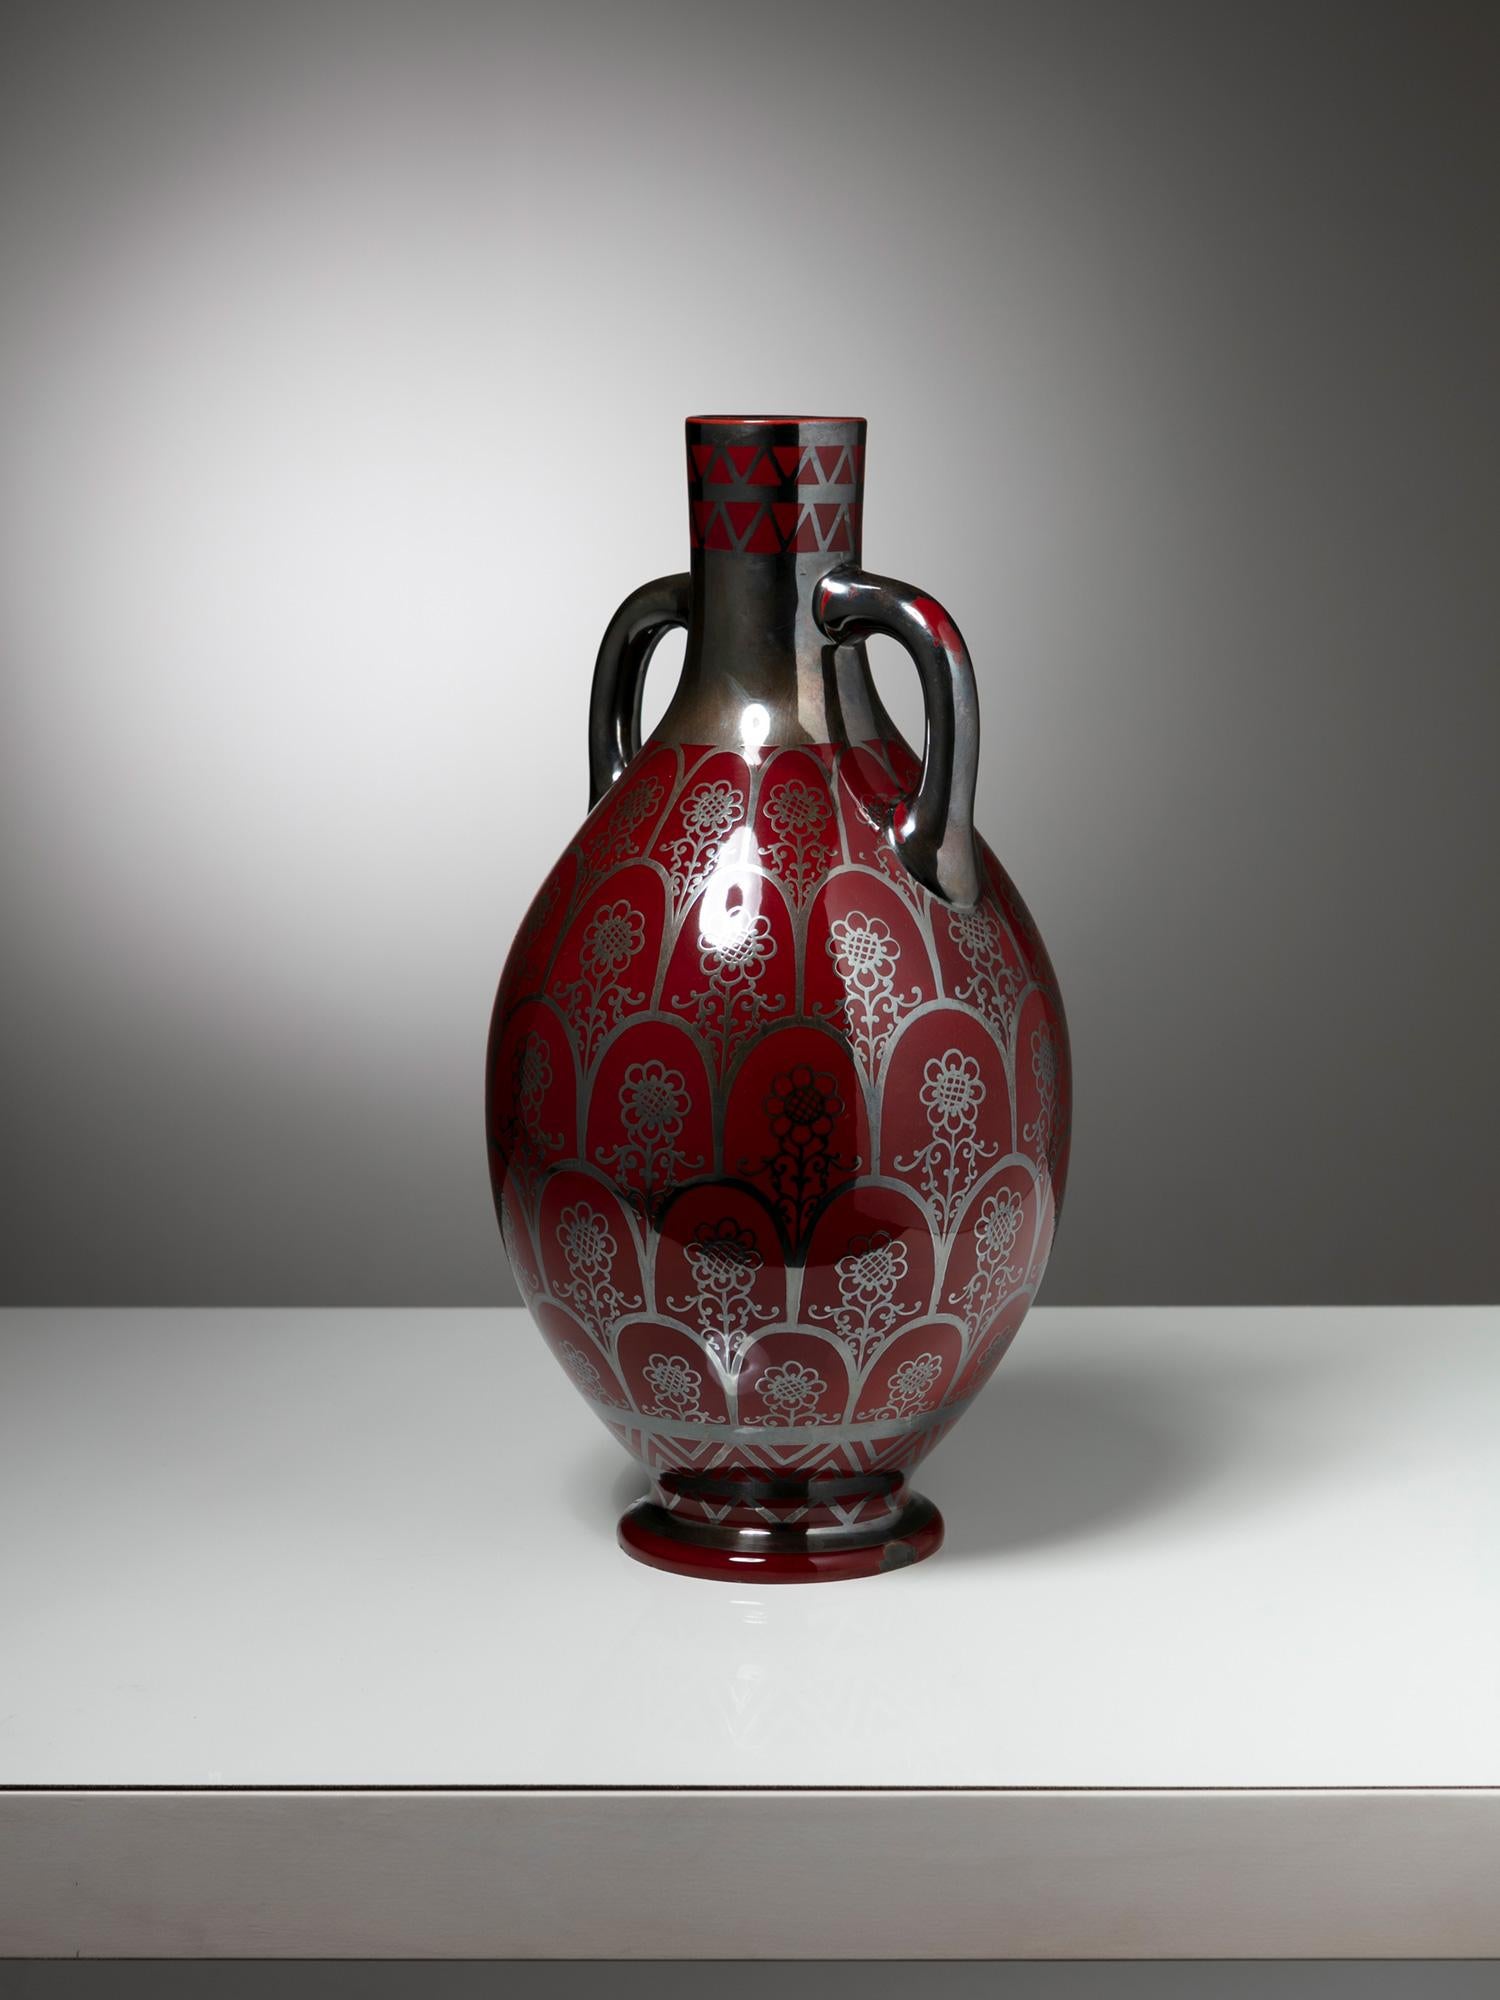 Large ceramic vase by Righard Ginori.
Dark red background with silver decoration.